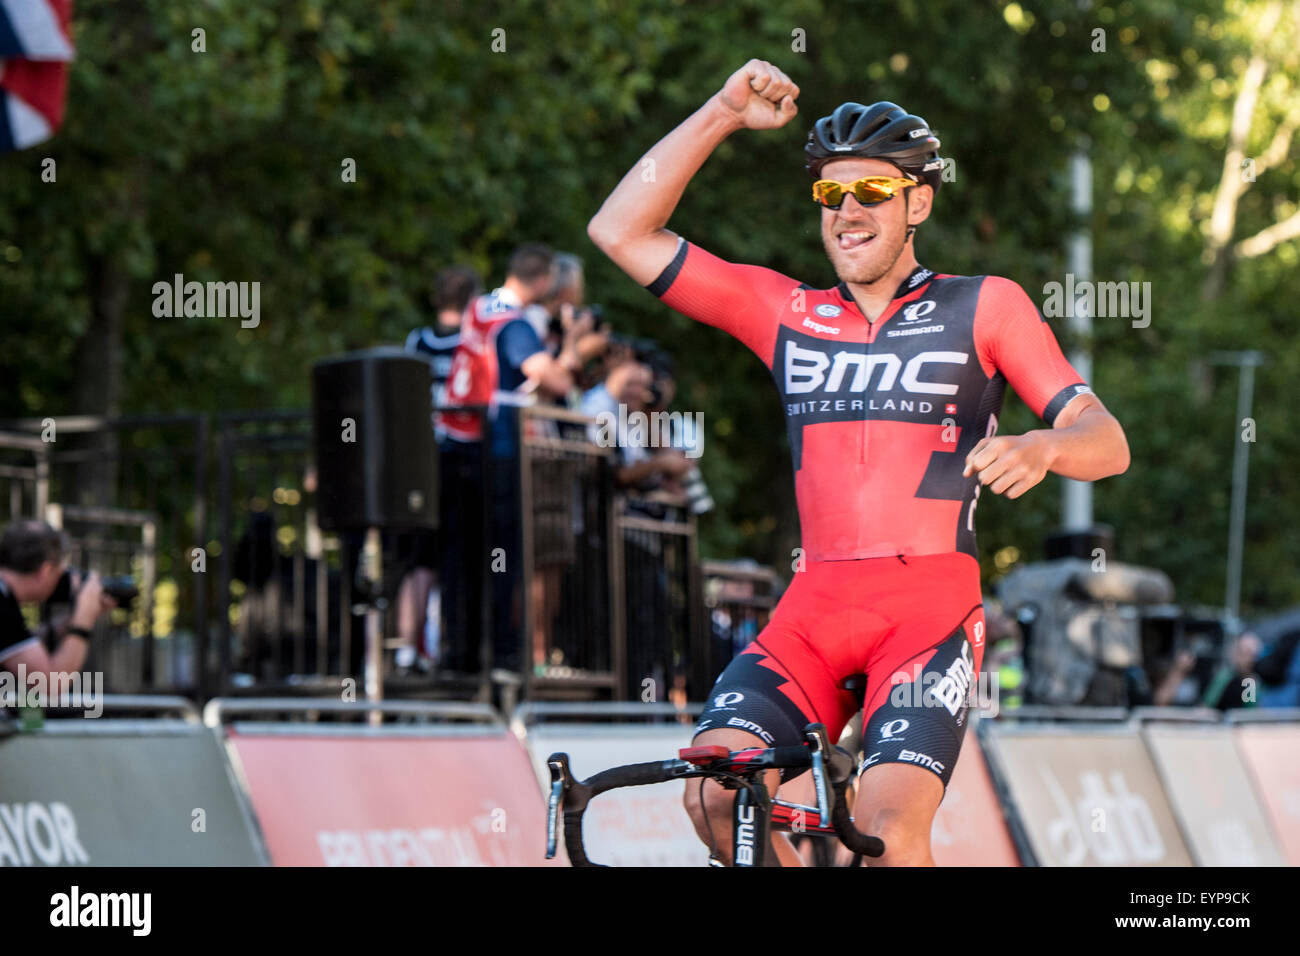 London, UK. 02nd Aug, 2015. Jean Pierre Drucker (BMC Racing Team) celebrates victory in the Prudential RideLondon-Surrey Classic at The Mall, London, United Kingdom on 2 August 2015. The race started at Horse Guards Parade and finished on The Mall after a 200km route around Surrey and Greater London. Credit:  Andrew Peat/Alamy Live News Stock Photo